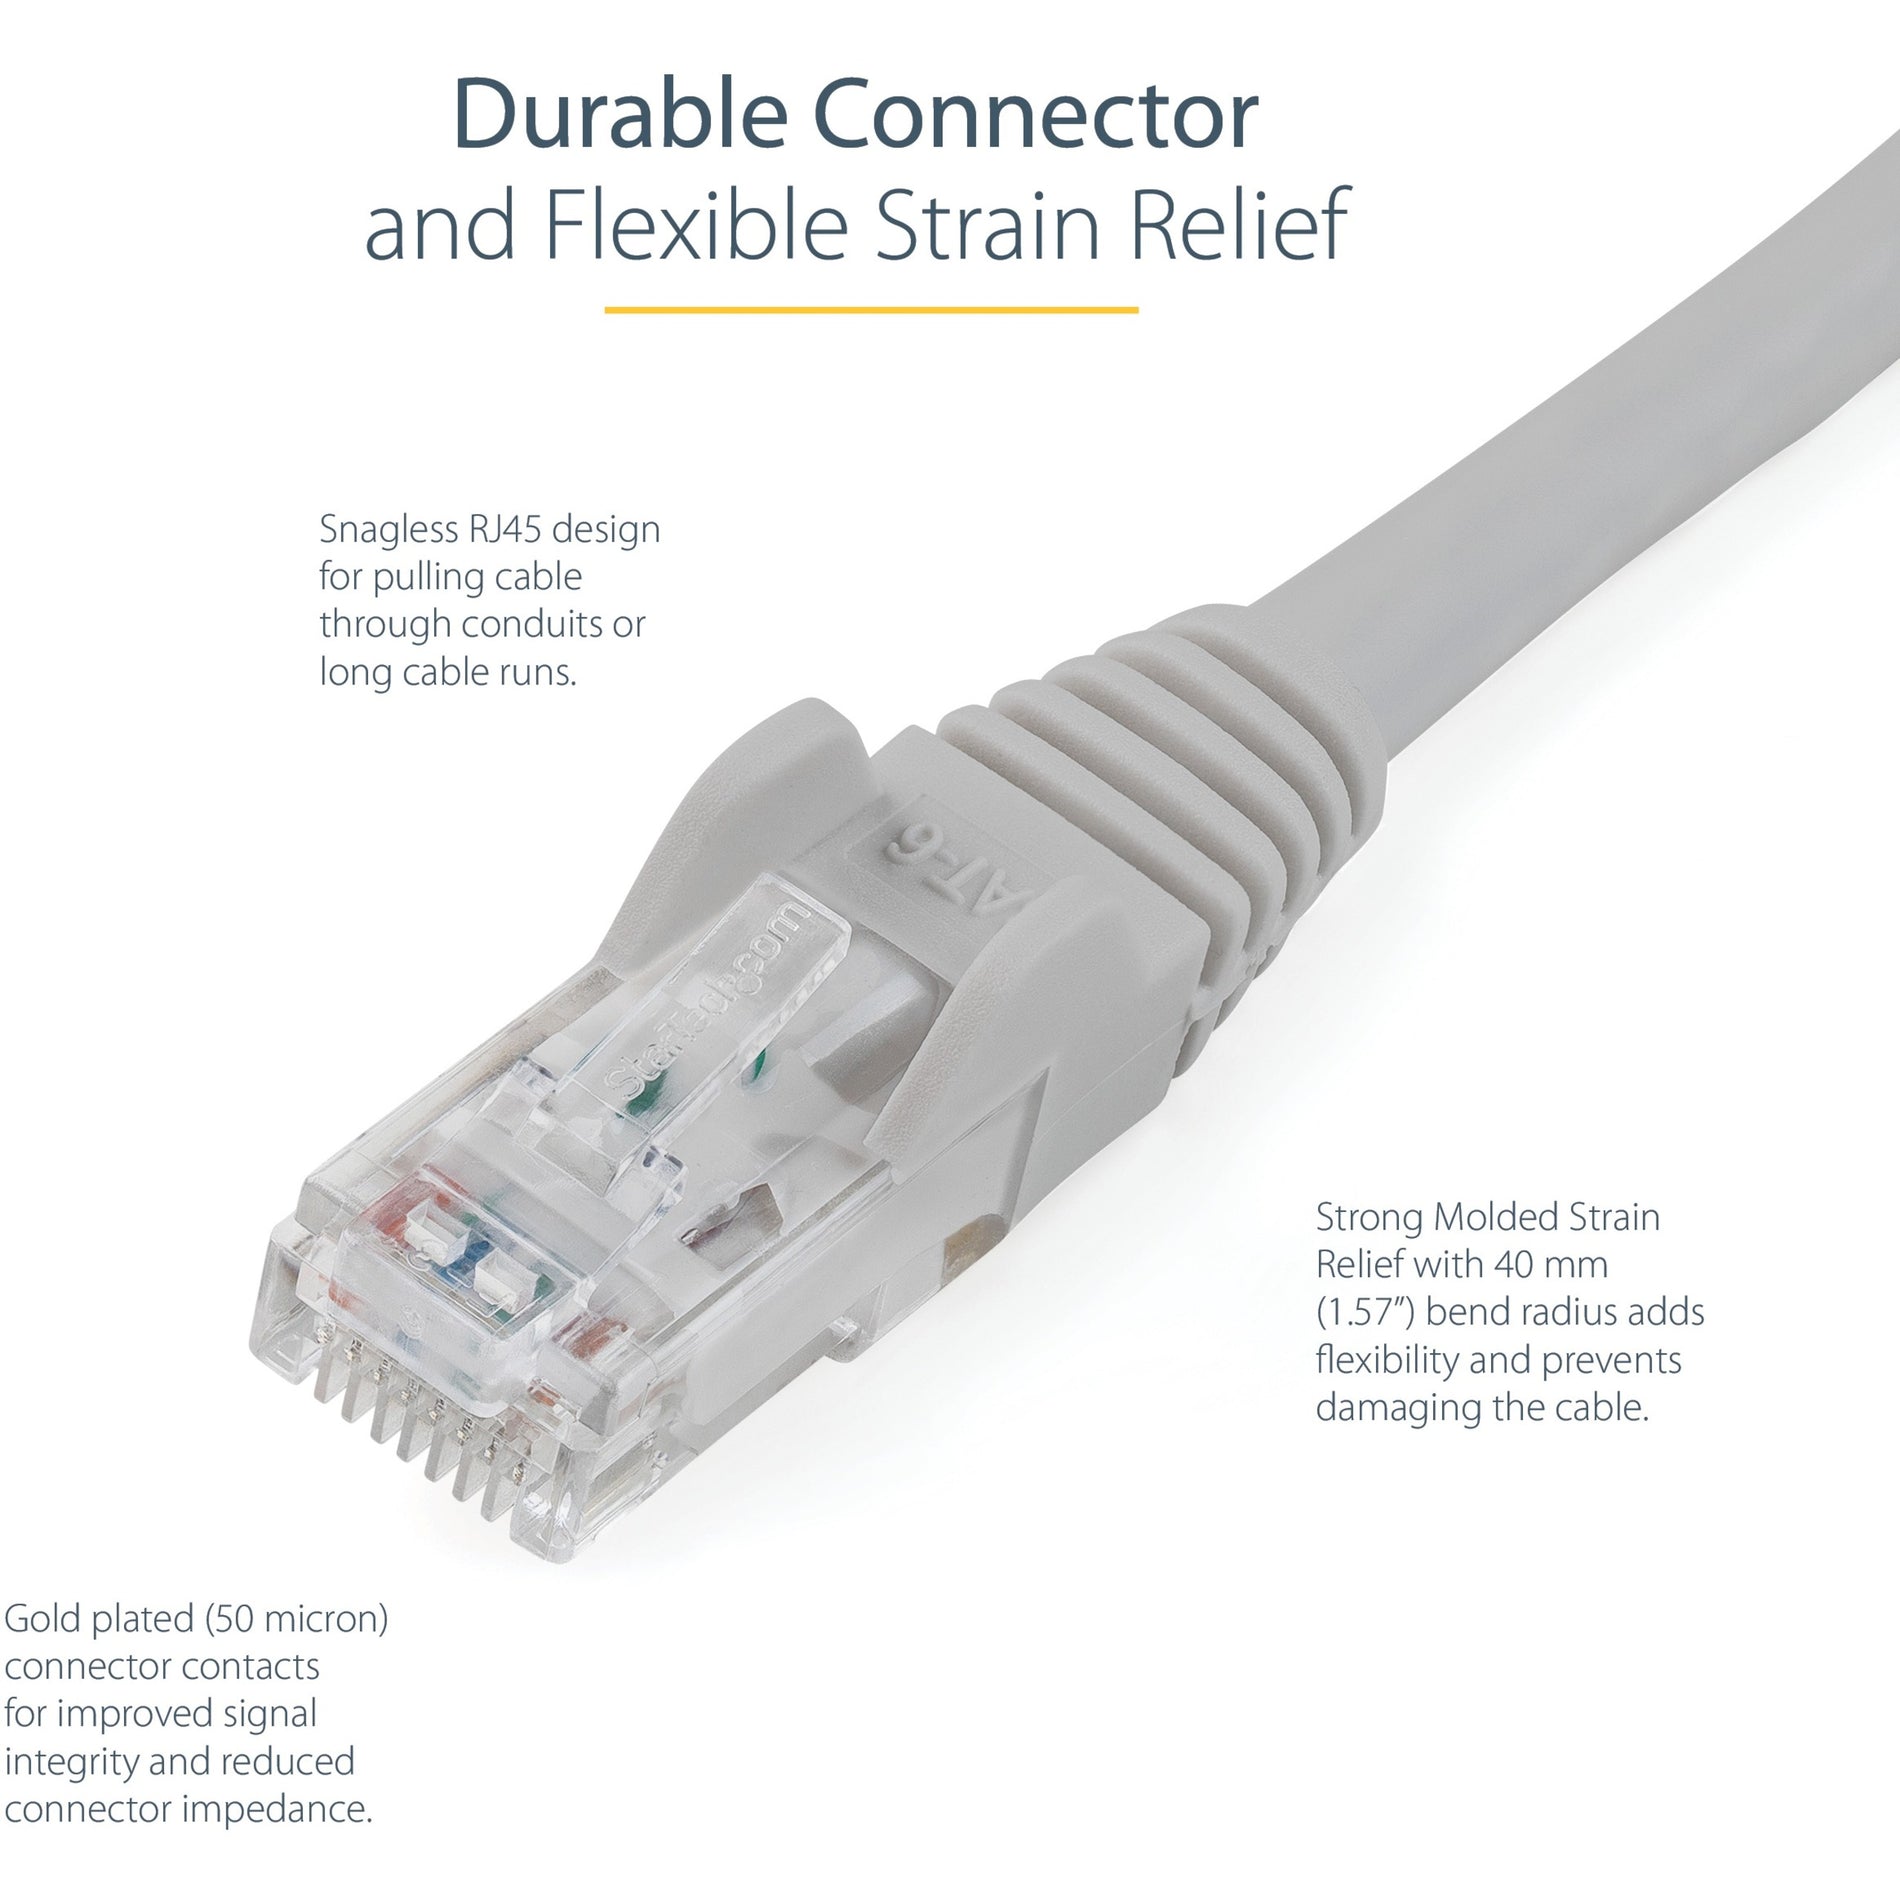 StarTech.com N6PATCH20GR Cat. 6 Network Cable, 20ft Gray Ethernet Cable, Snagless RJ45 Connectors